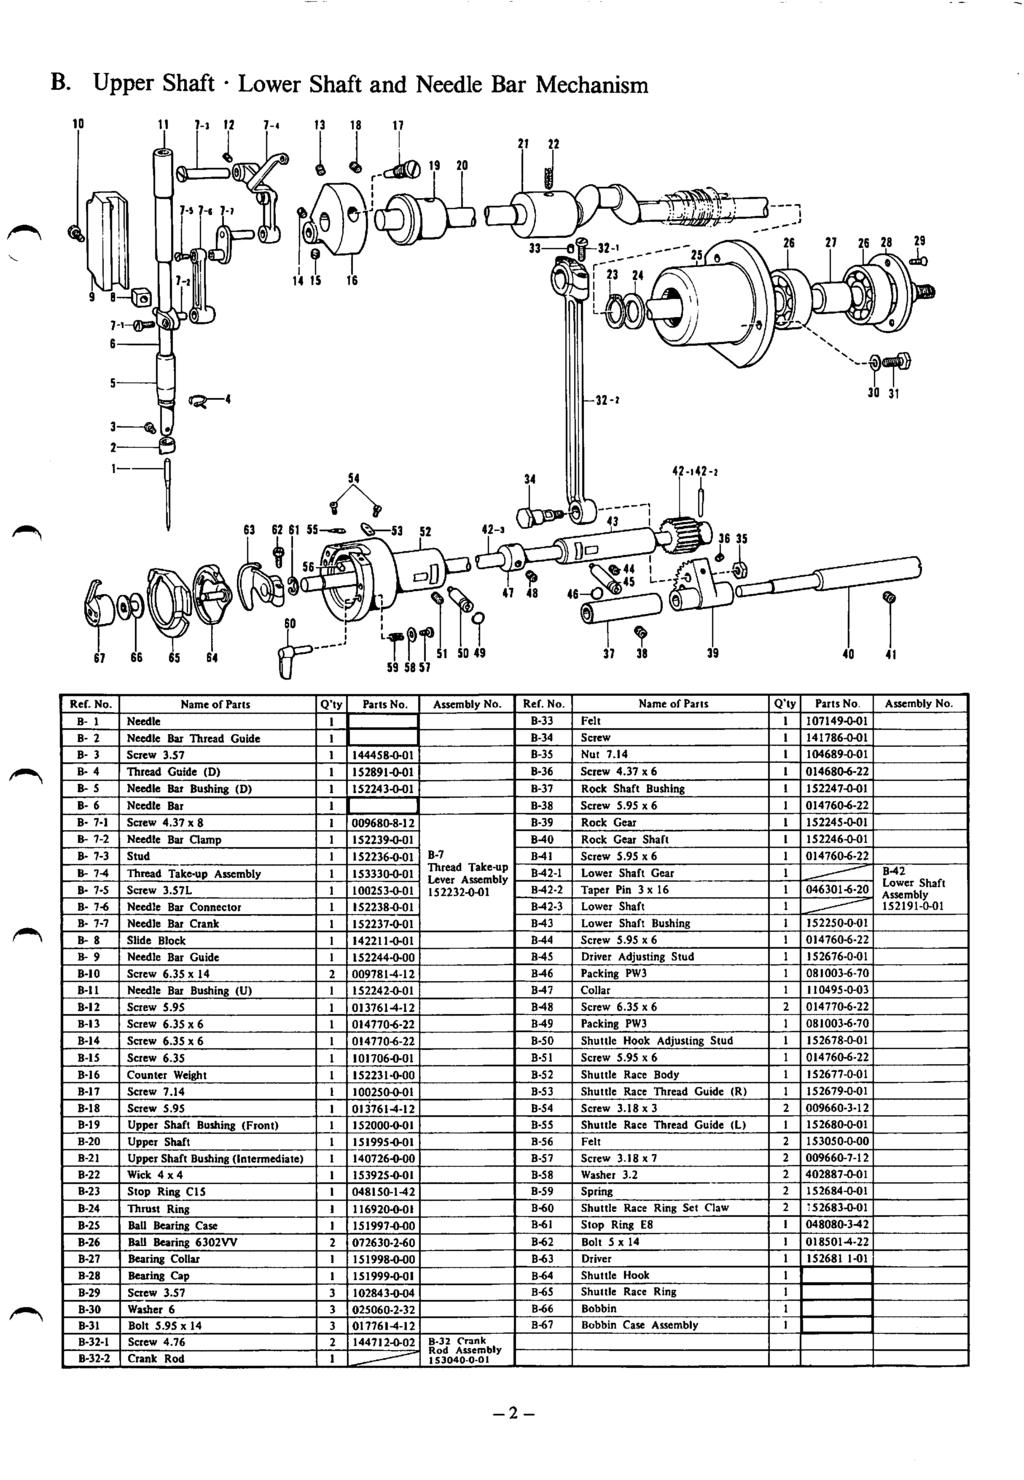 B. Upper Shaft Lower Shaft and Needle Bar Mechanism 0 ' ' '------ 3-30 3 54 A 40 Ref. No. Name of Parts Q'ty Parts No. No. Ref. No. Name of Parts B- Needle B-33 Felt B Needle Bar Thread Guide B-34 Screw B 3 Screw 3.